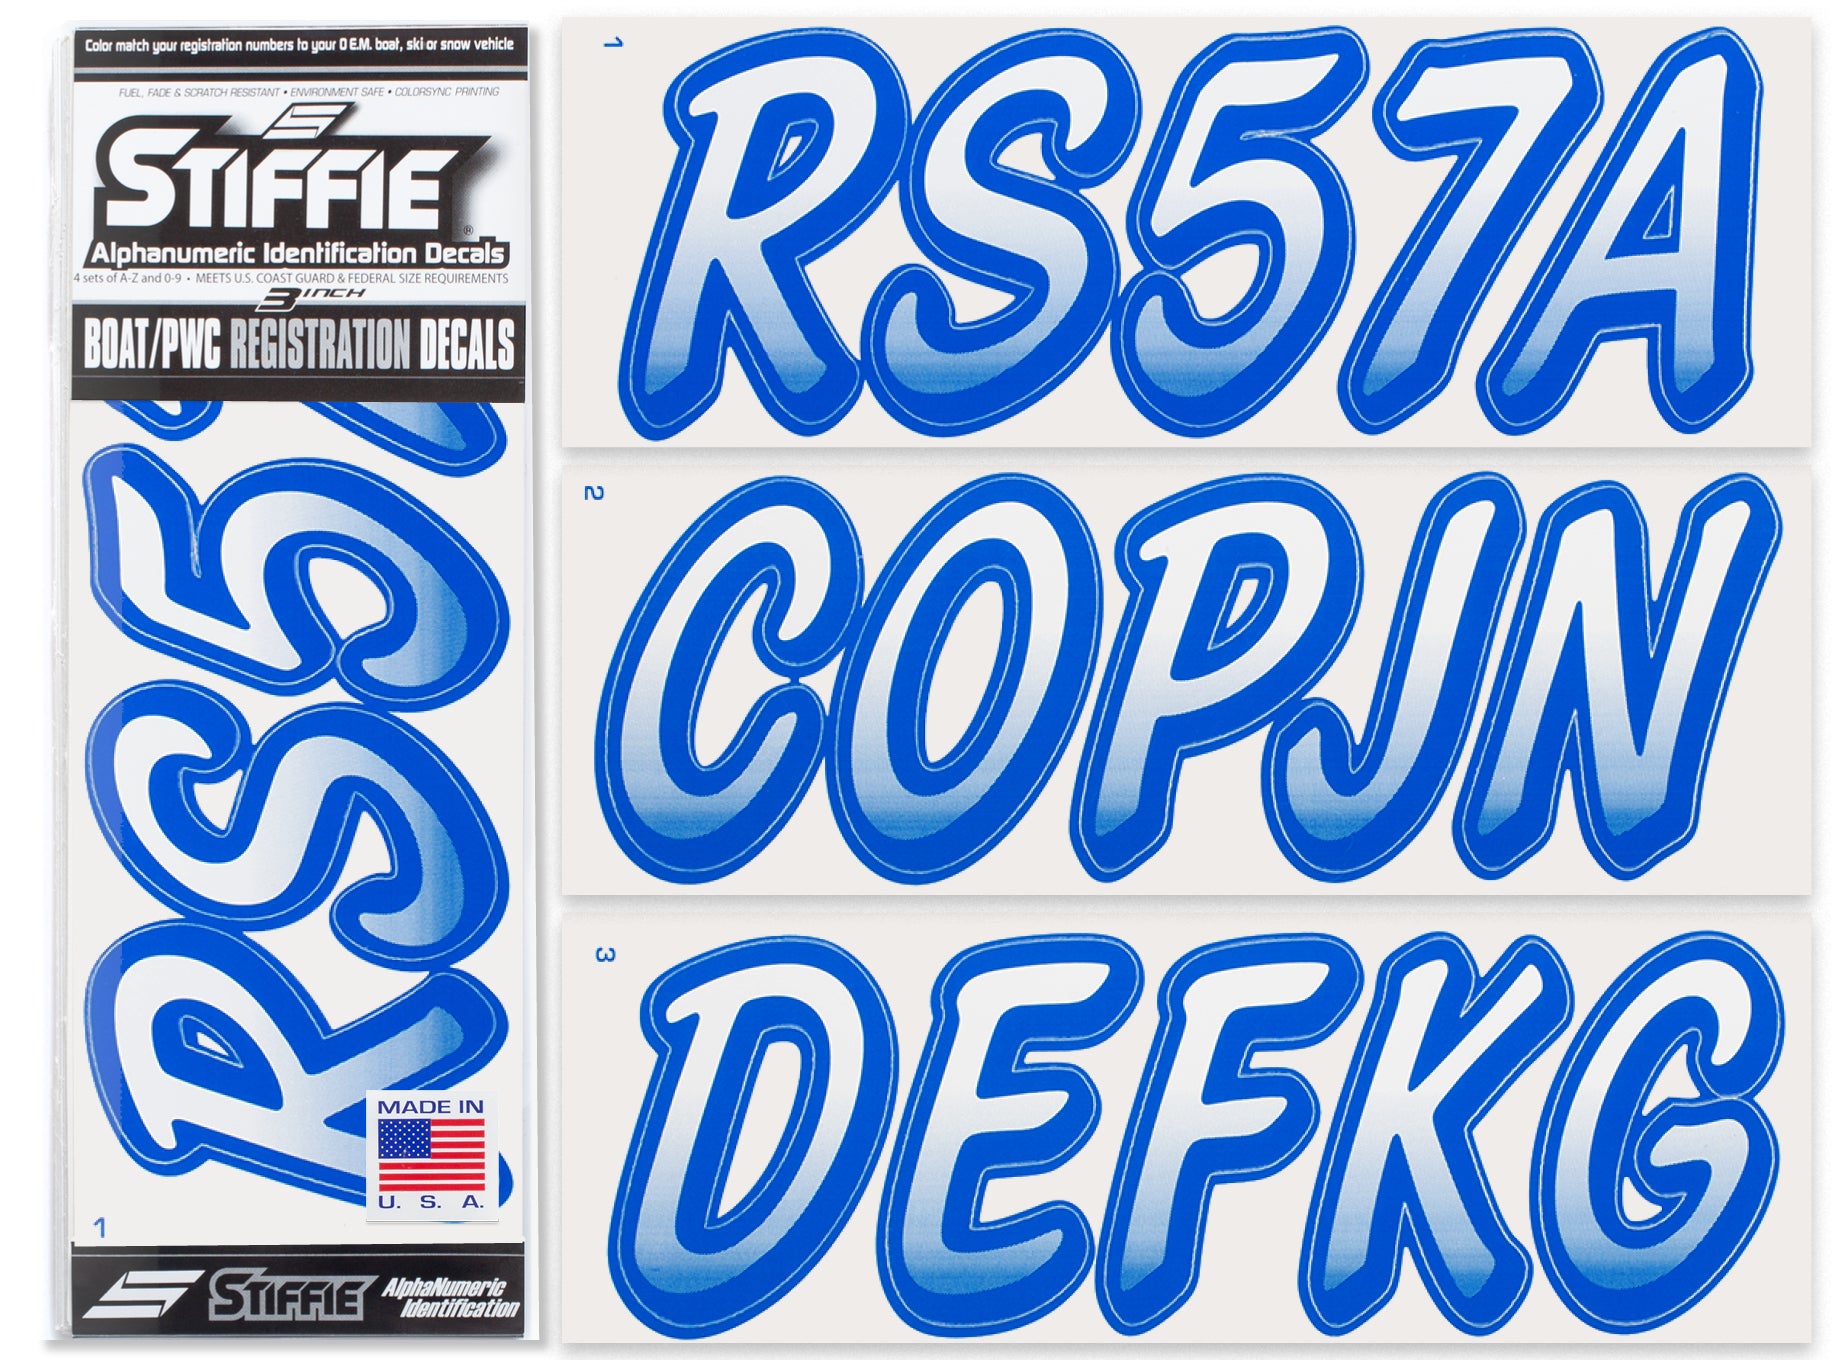 STIFFIE Whipline White/Blue 3" Alpha-Numeric Registration Identification Numbers Stickers Decals for Boats & Personal Watercraft